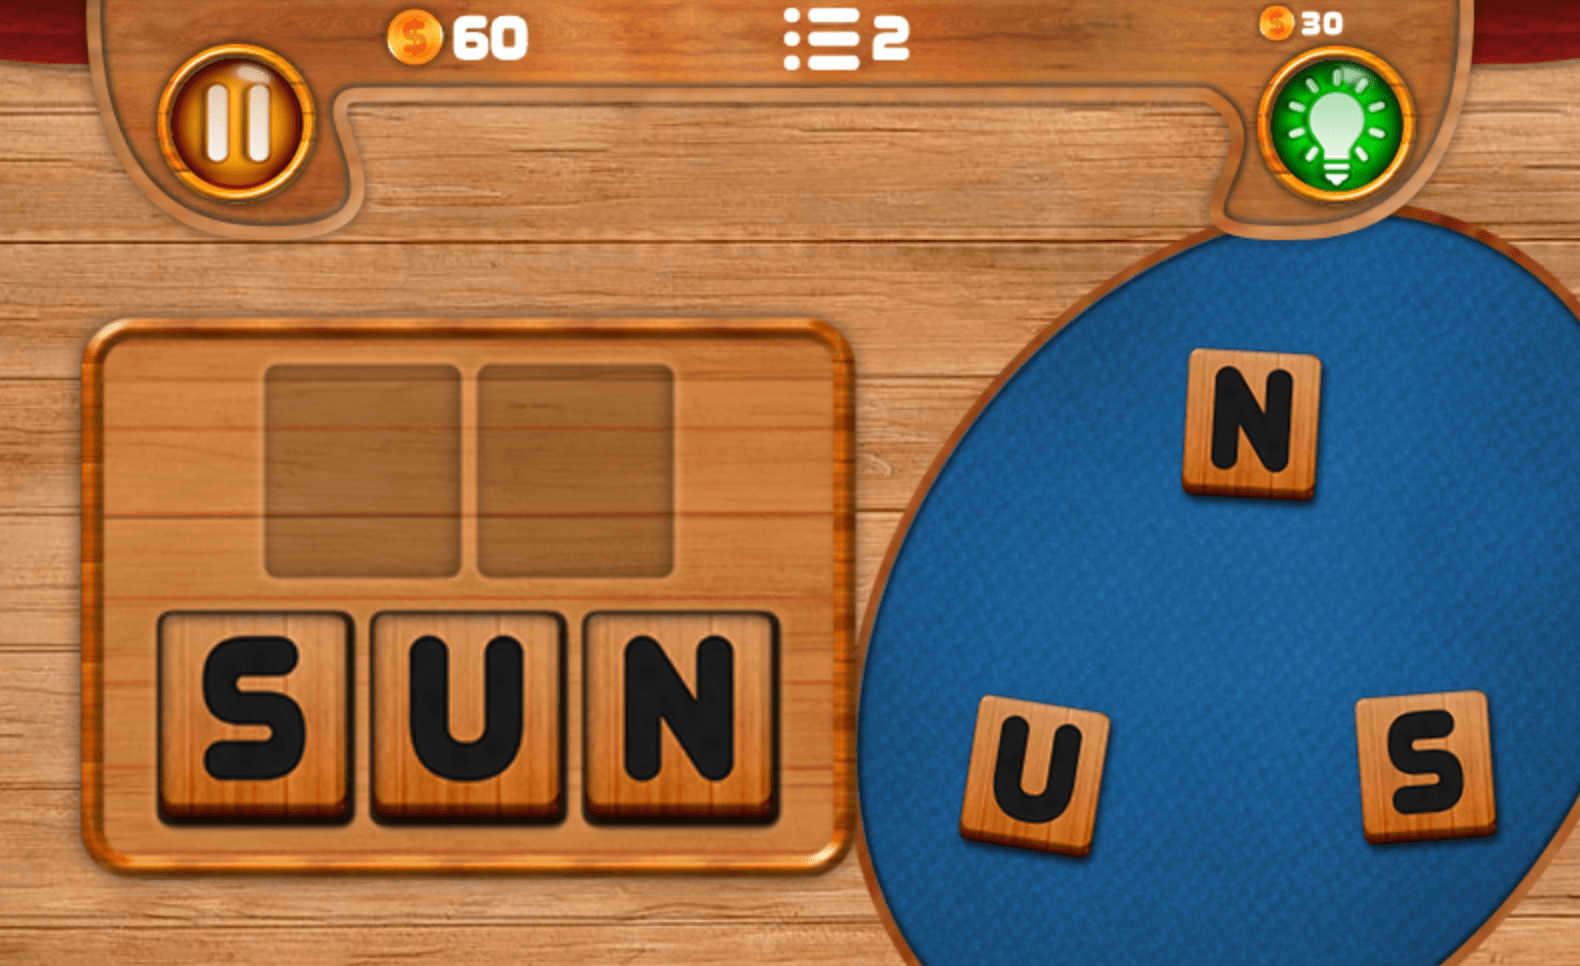 Word Detector - Play it now at Coolmath Games